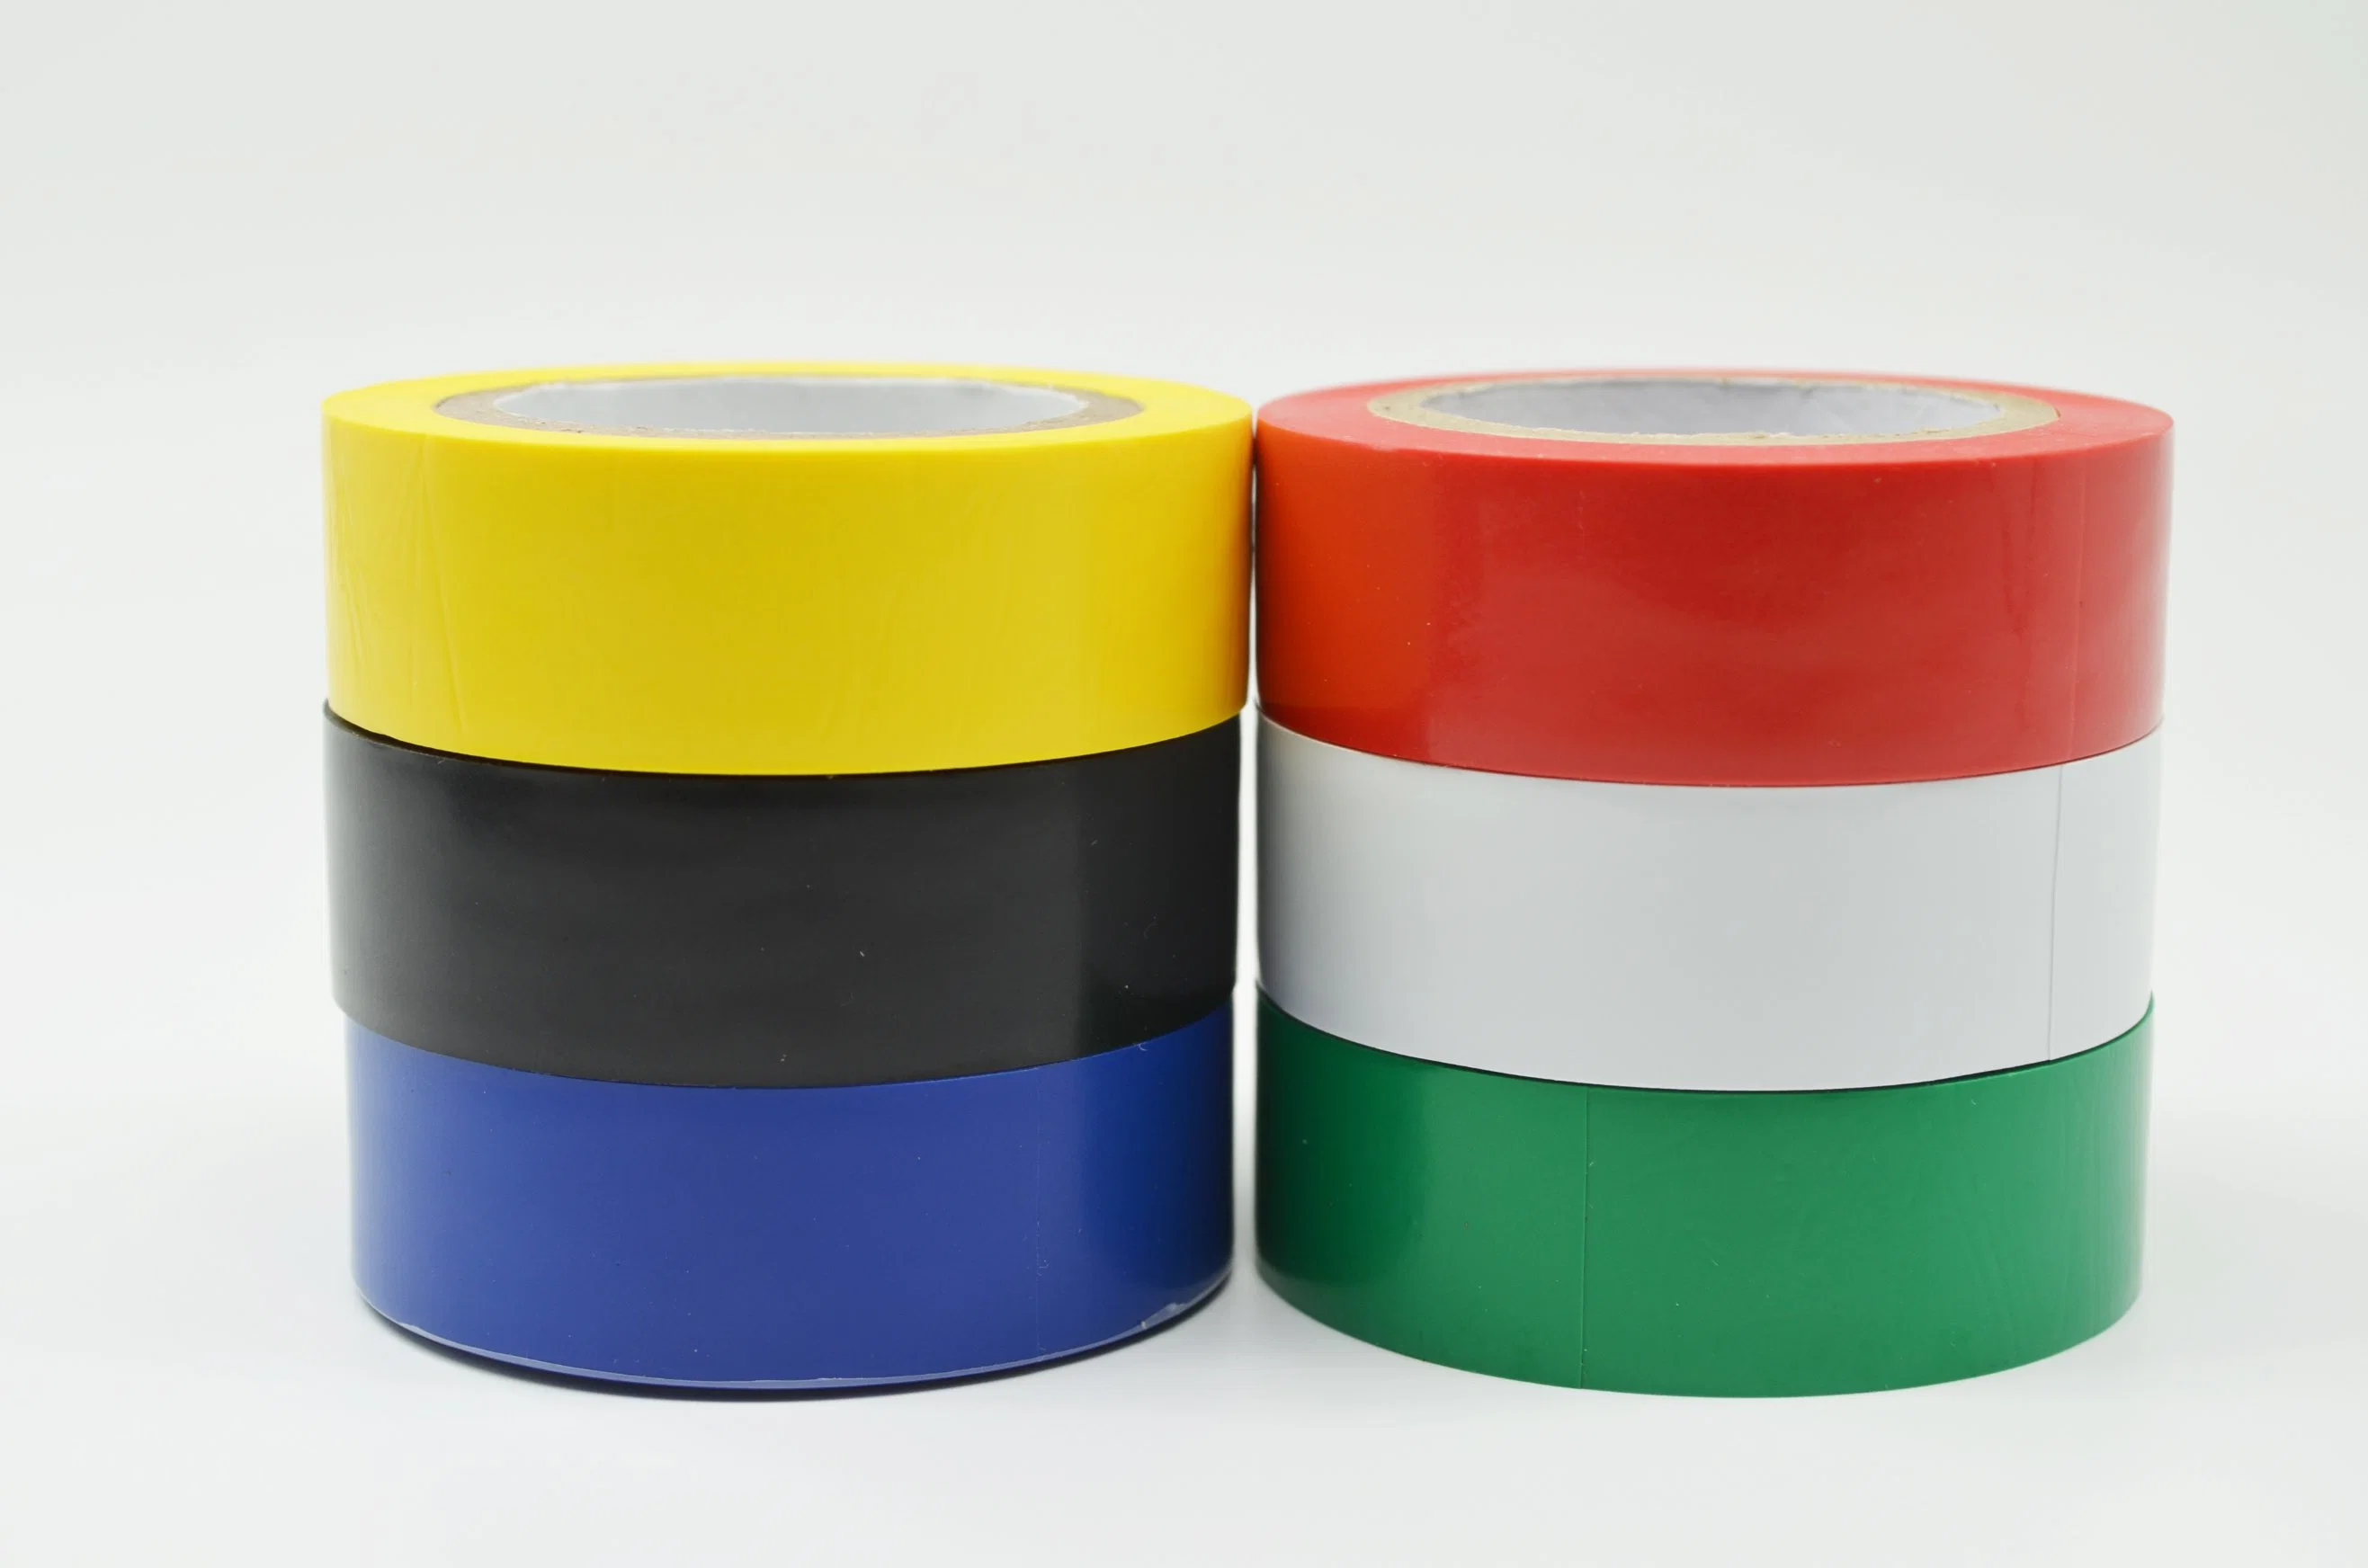 Electrical Tape - PVC General Purpose - Waterproof Flame Retardant Strong Rubber Based Adhesive UL Listed by Hampool